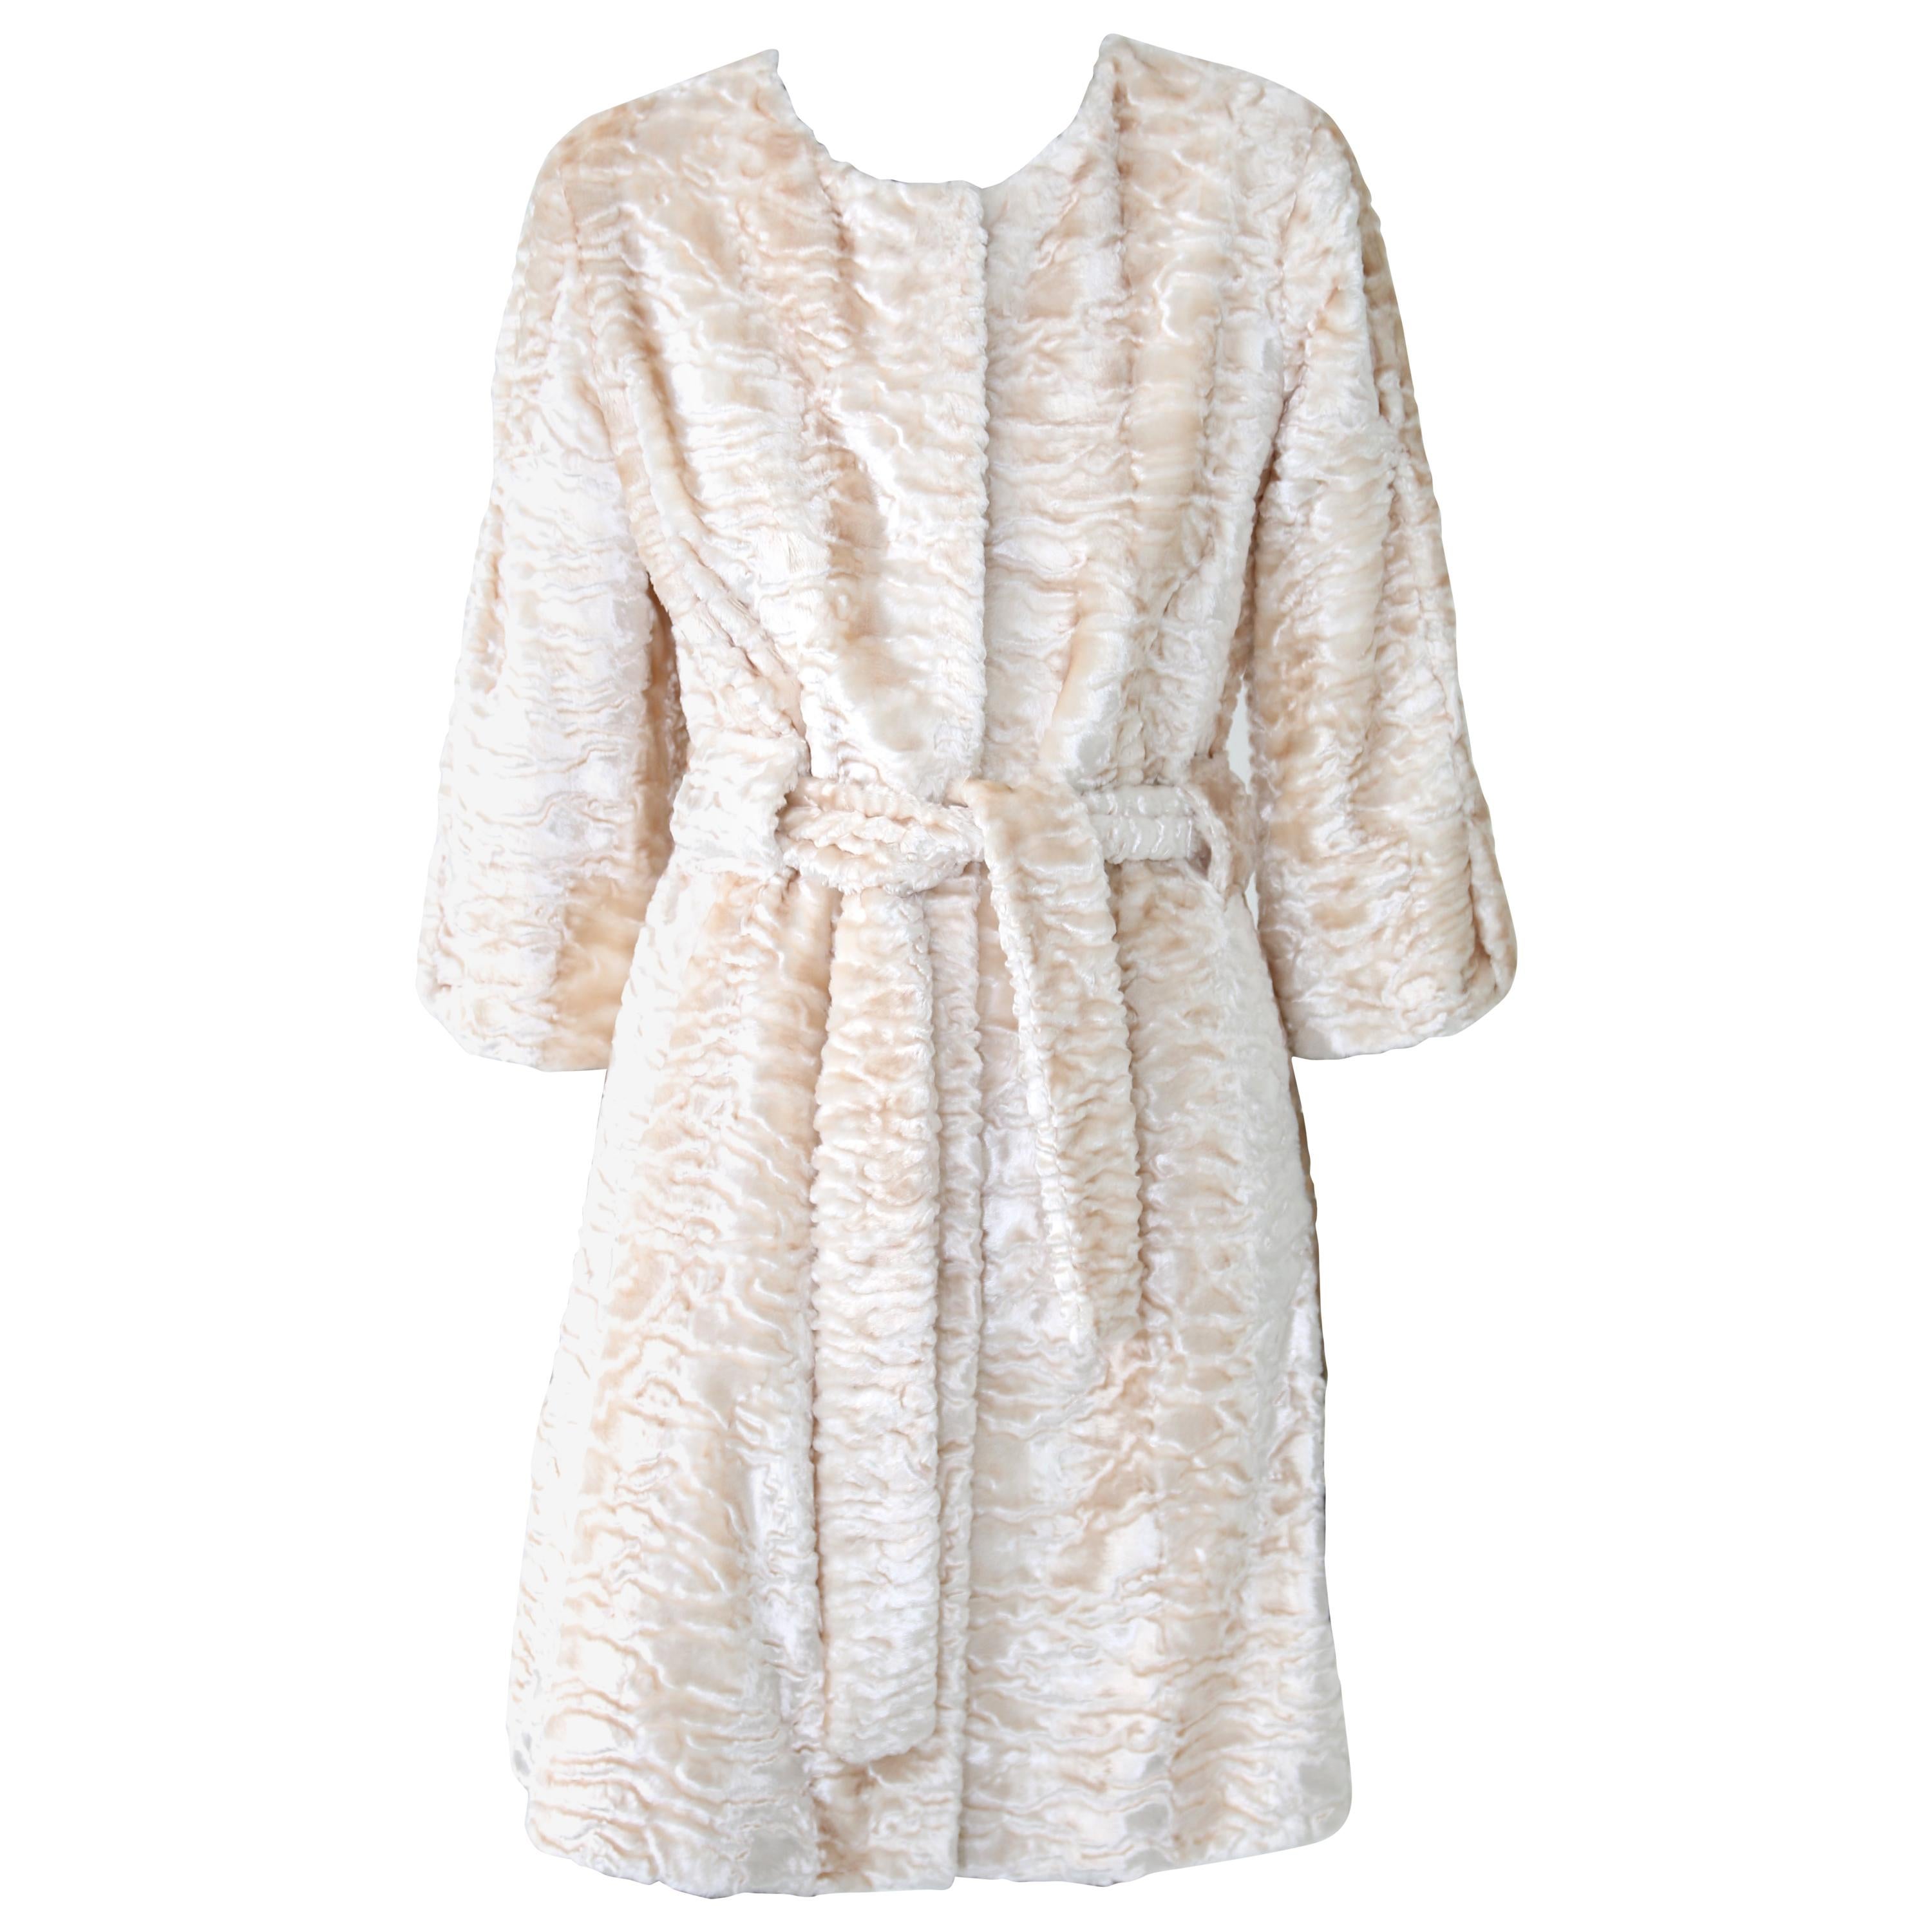 Pelush Ivory Astrakhan Faux Fur Coat With Belt - XS - (1/Small Available) For Sale